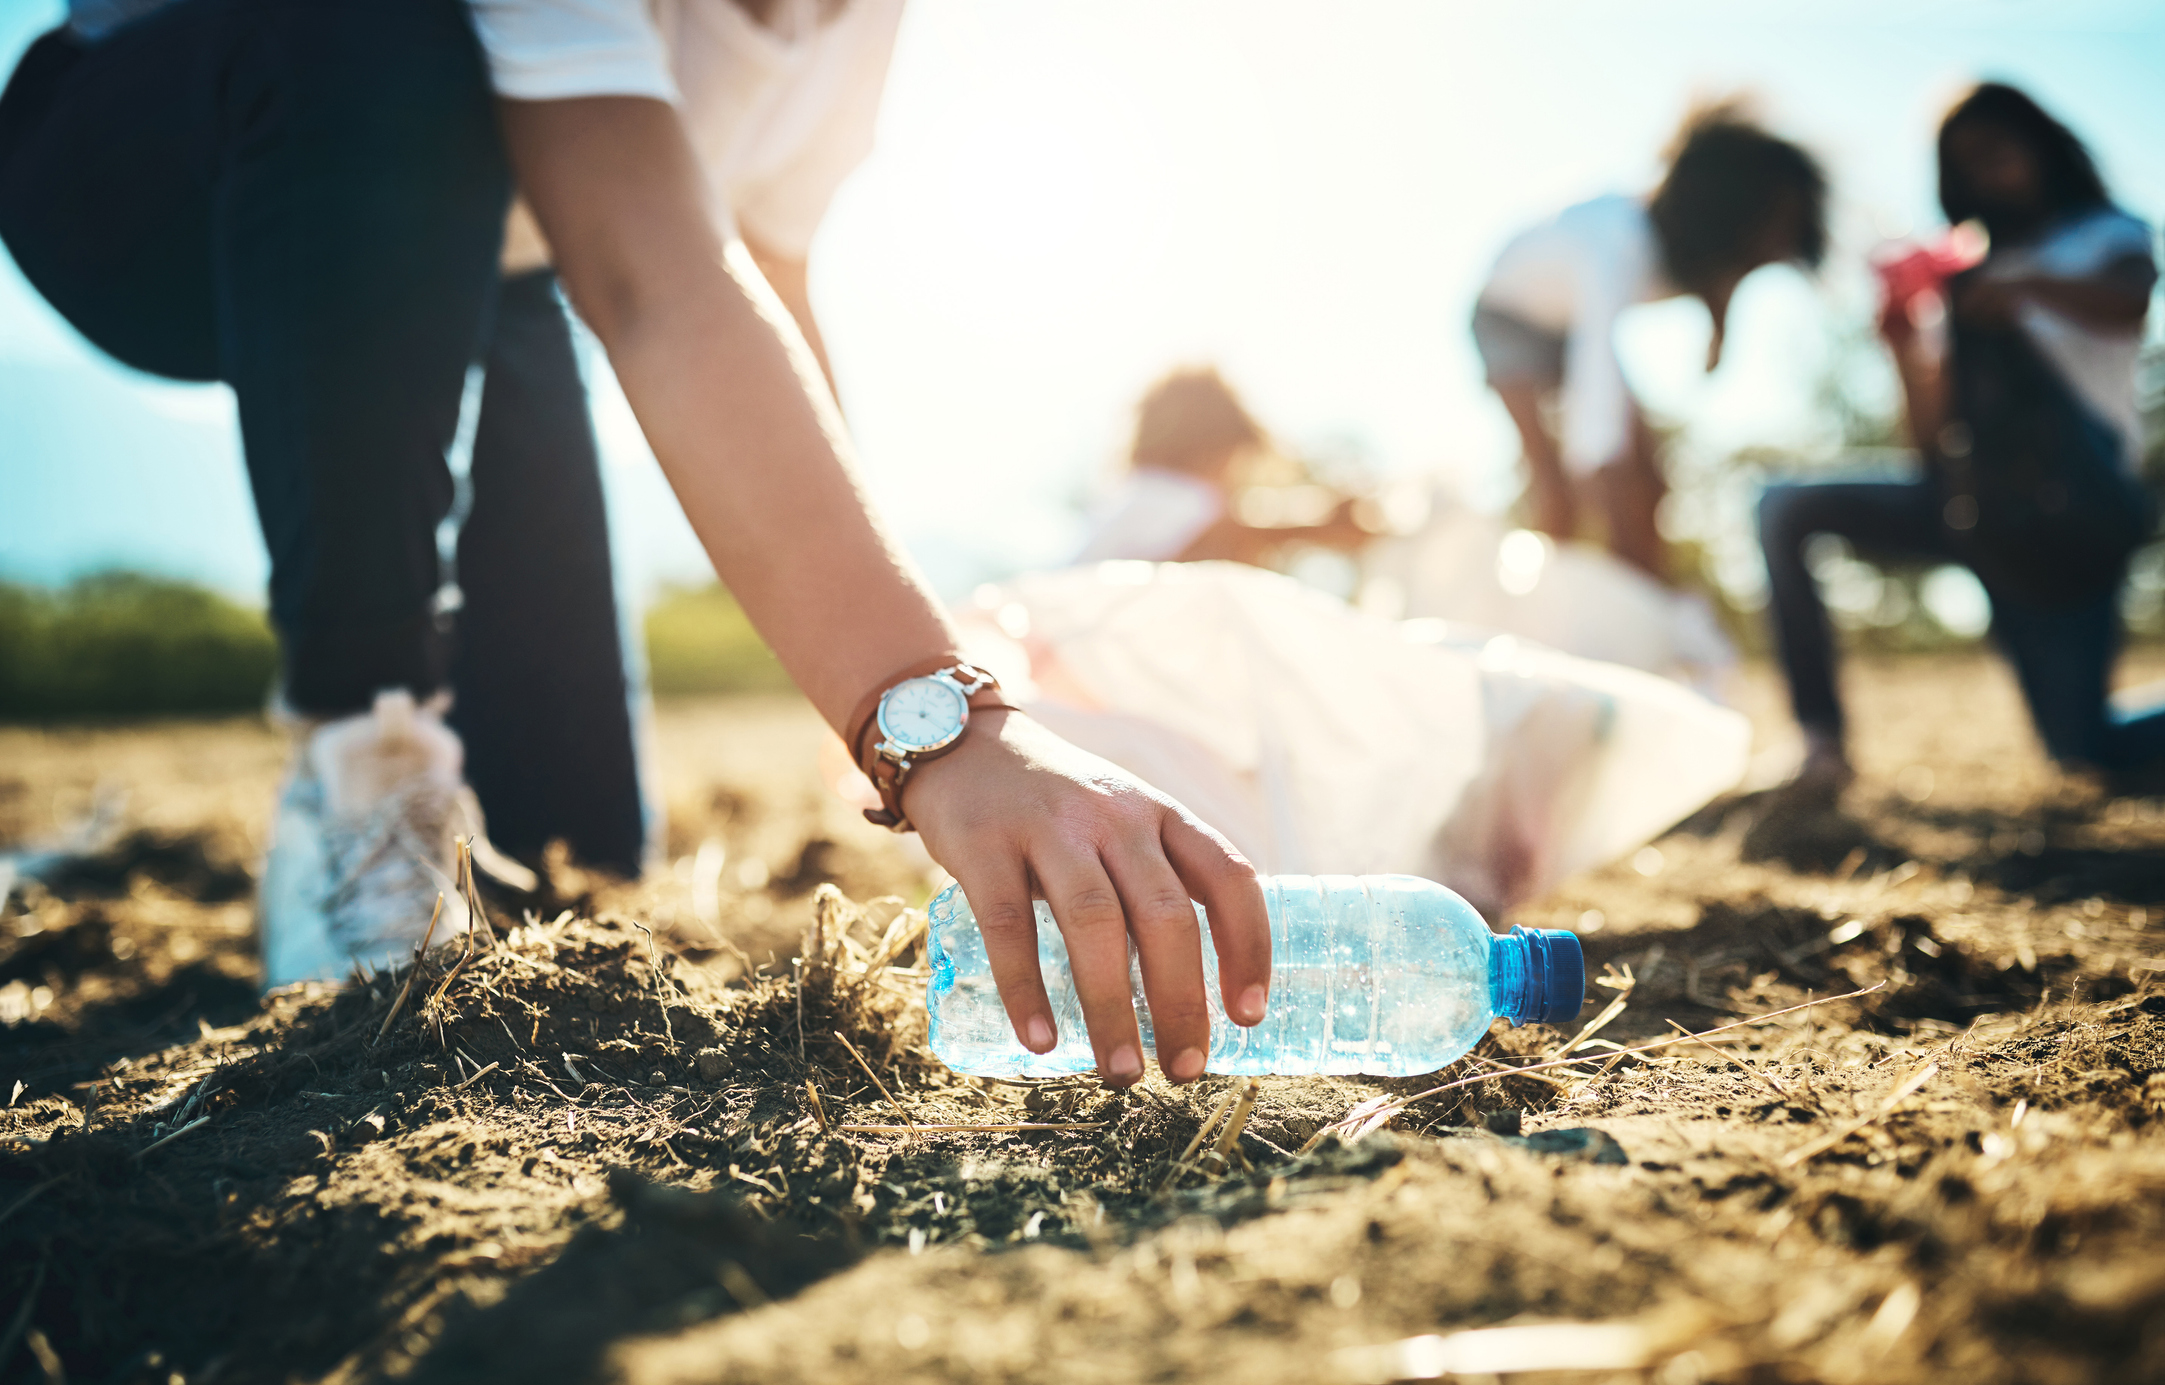 Cleaning up a plastic bottle in a field.